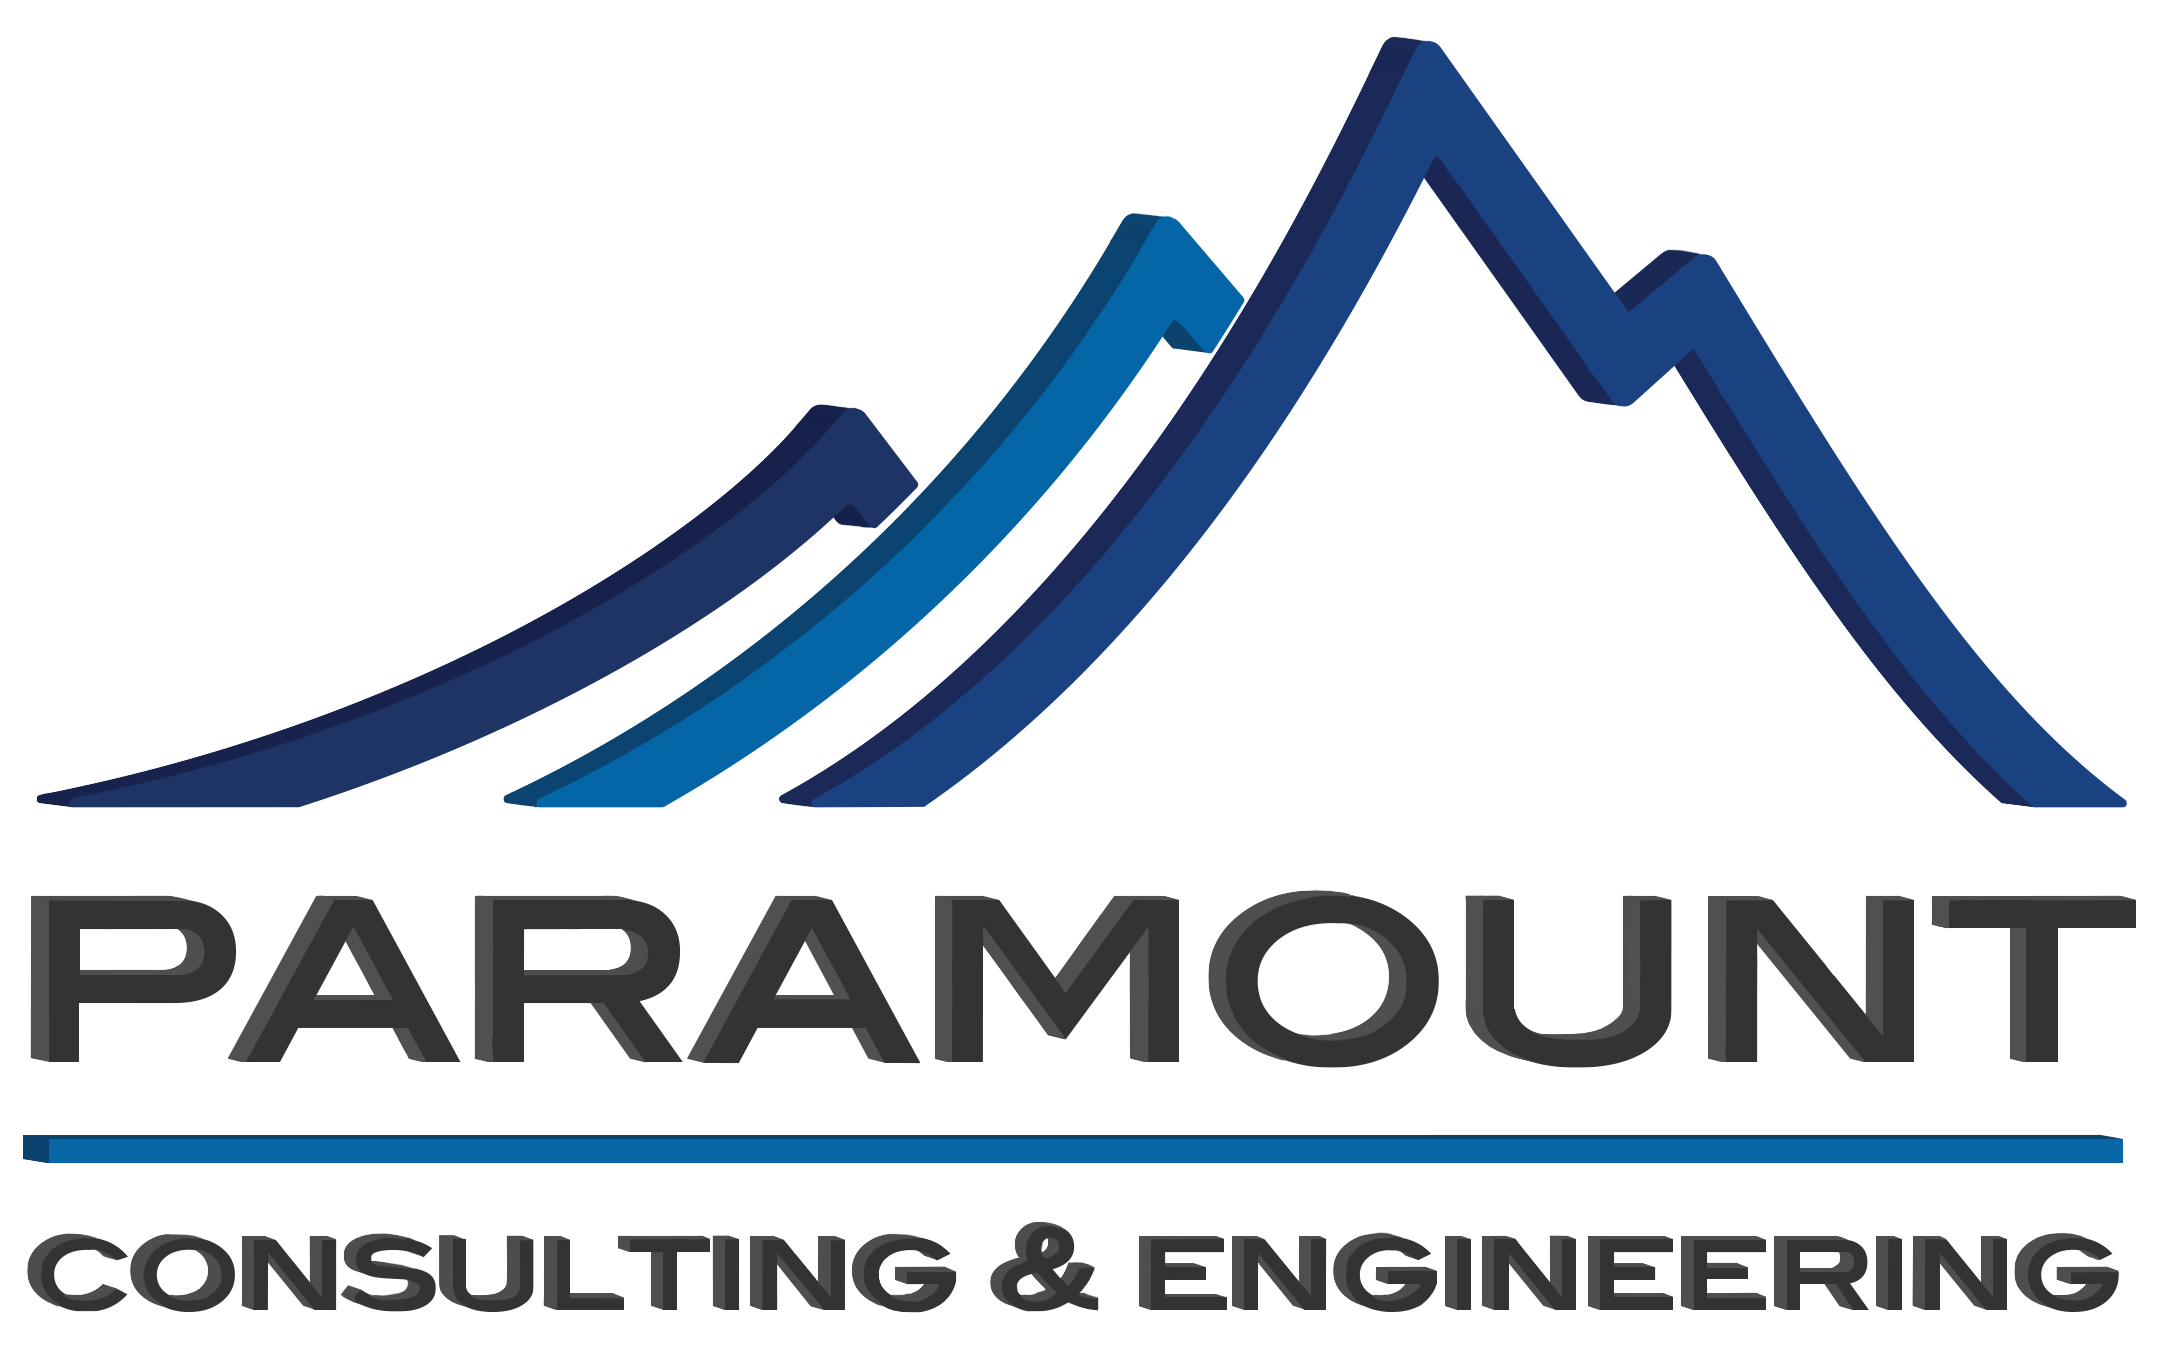 Paramount Consulting & Engineering